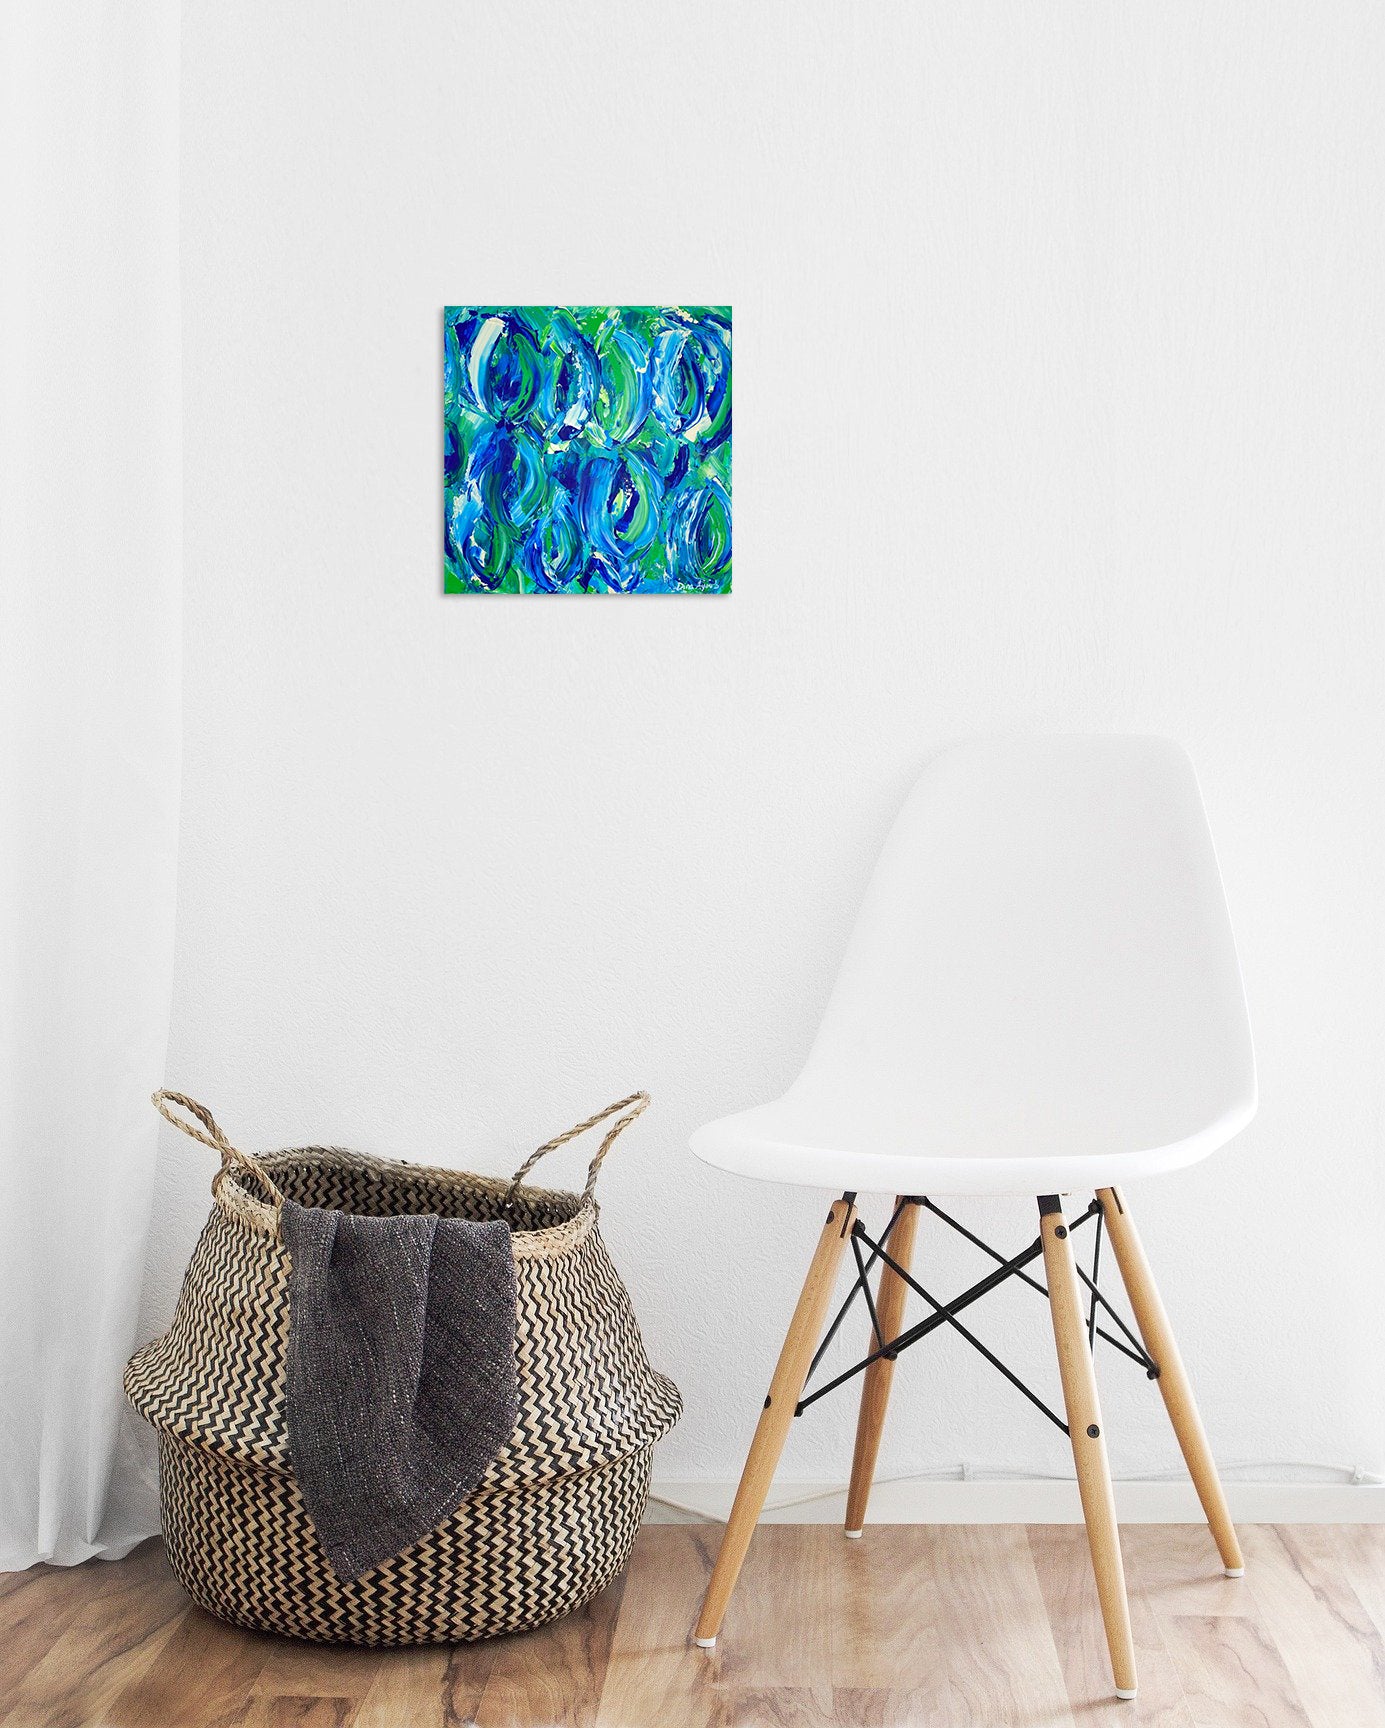 Abstract original acrylic painting in blue and green